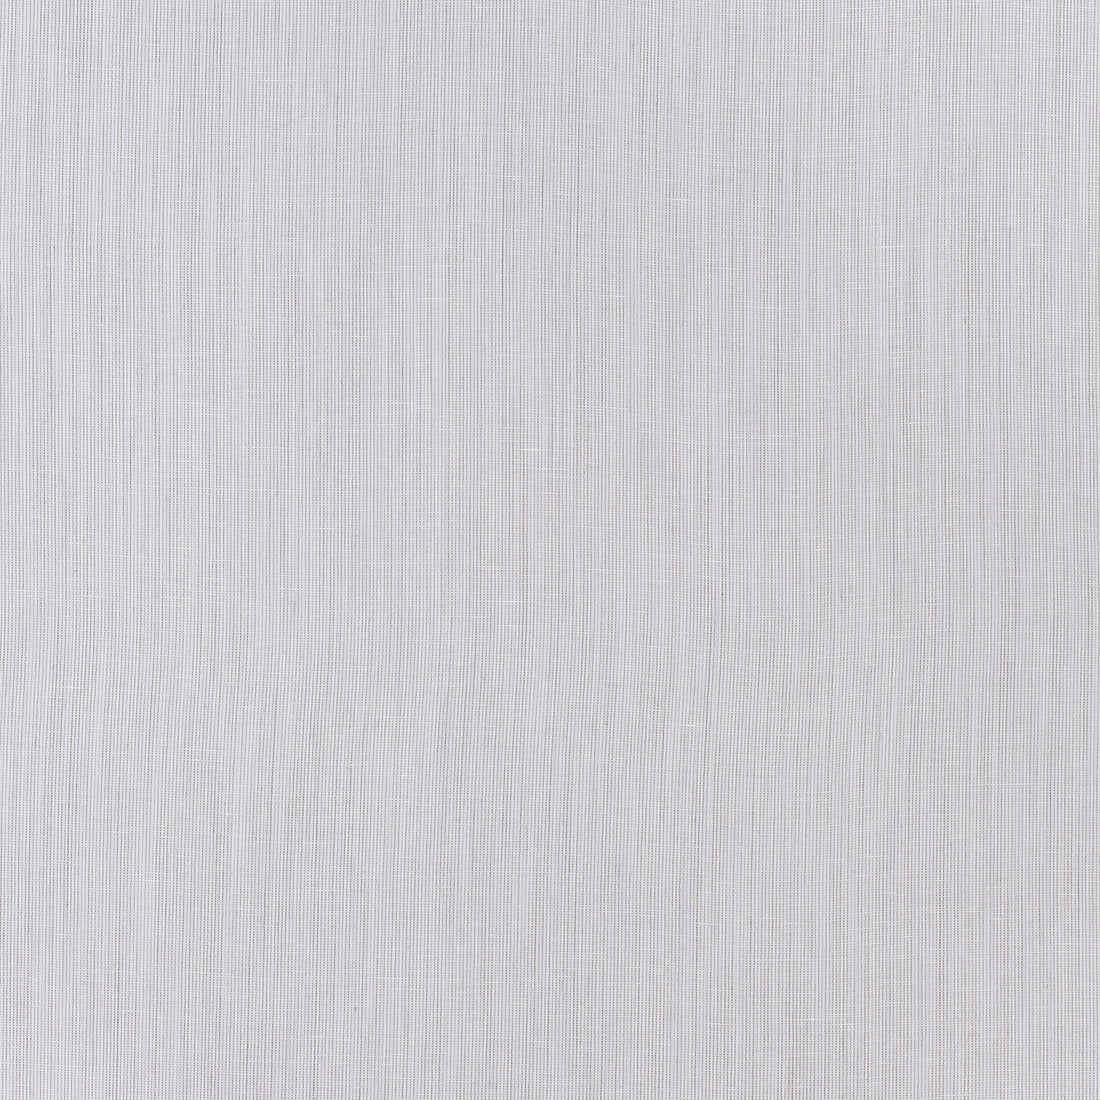 Berkshire fabric in smoke color - pattern number FWW7120 - by Thibaut in the Atmosphere collection